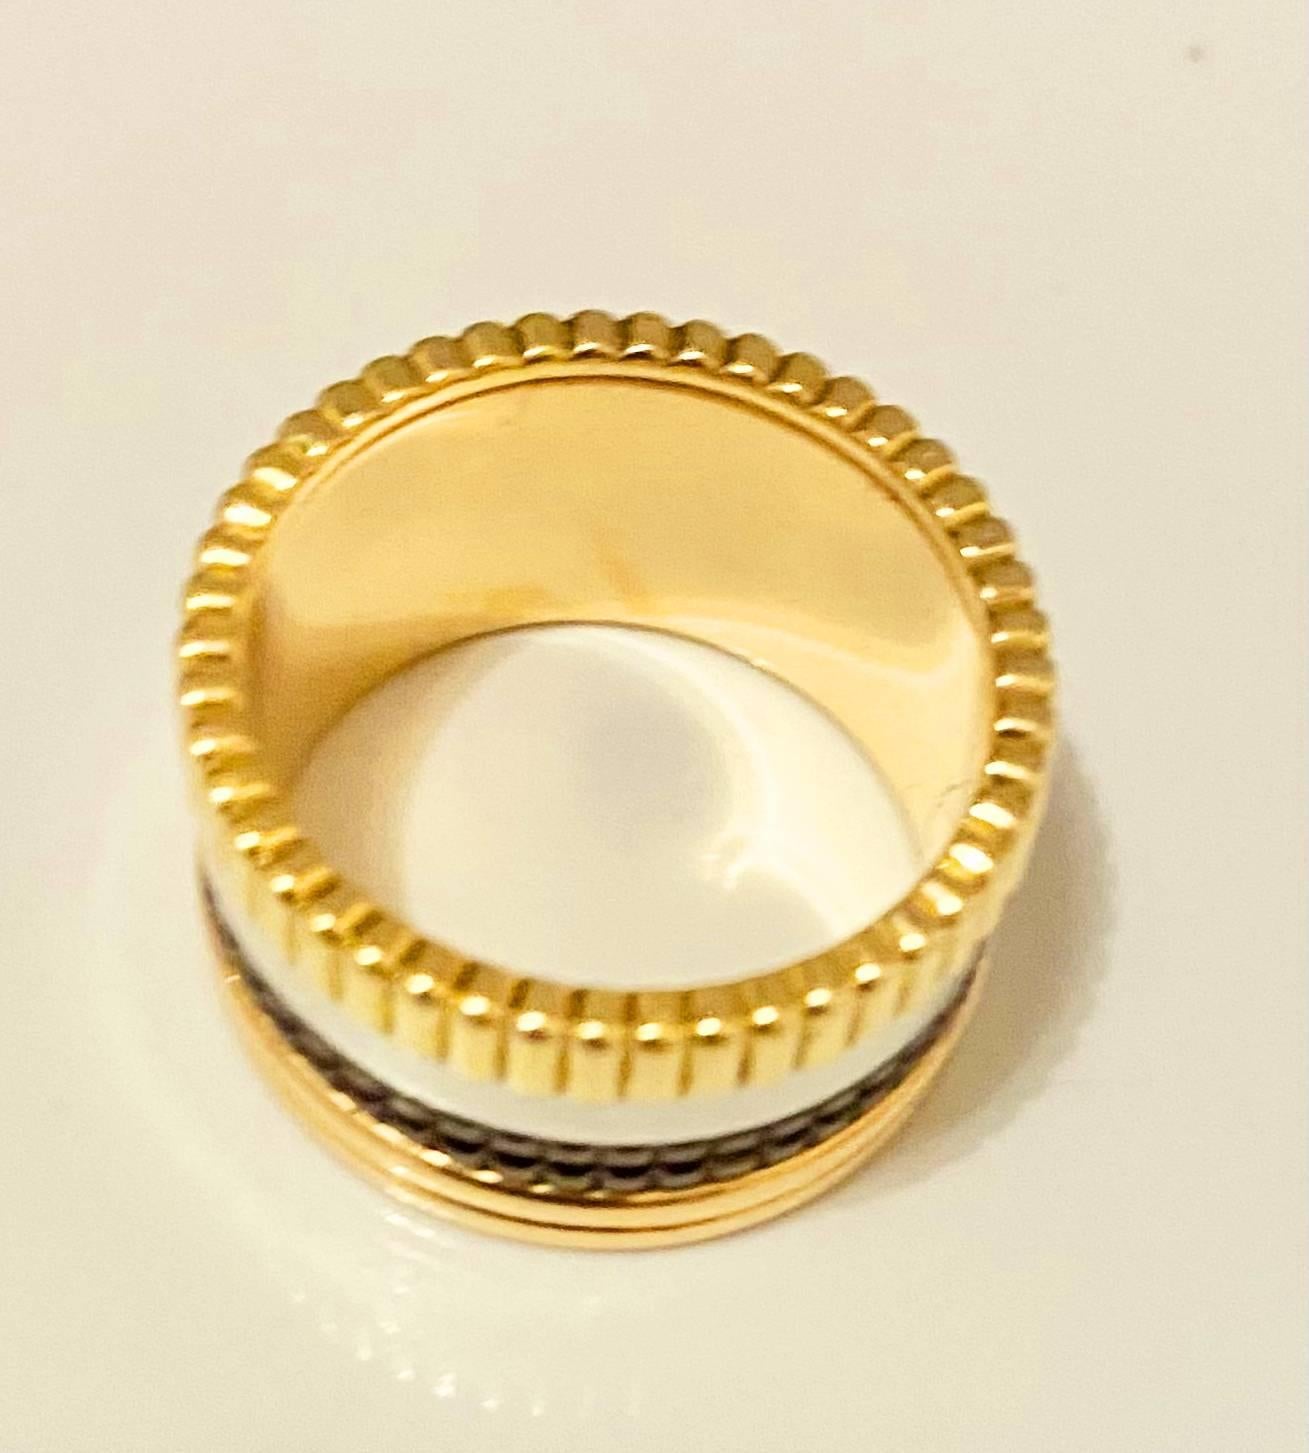 BOUCHERON COLLECTION QUATRE FOUR CLASSIC LARGE RING 

Boucheron ring from the Quatre collection, Classique Large, in 18-carat yellow and pink white gold and black PVD
Size: 55mm 
Year: 2010 
Condition: good, slight wear, barely visible, comes with